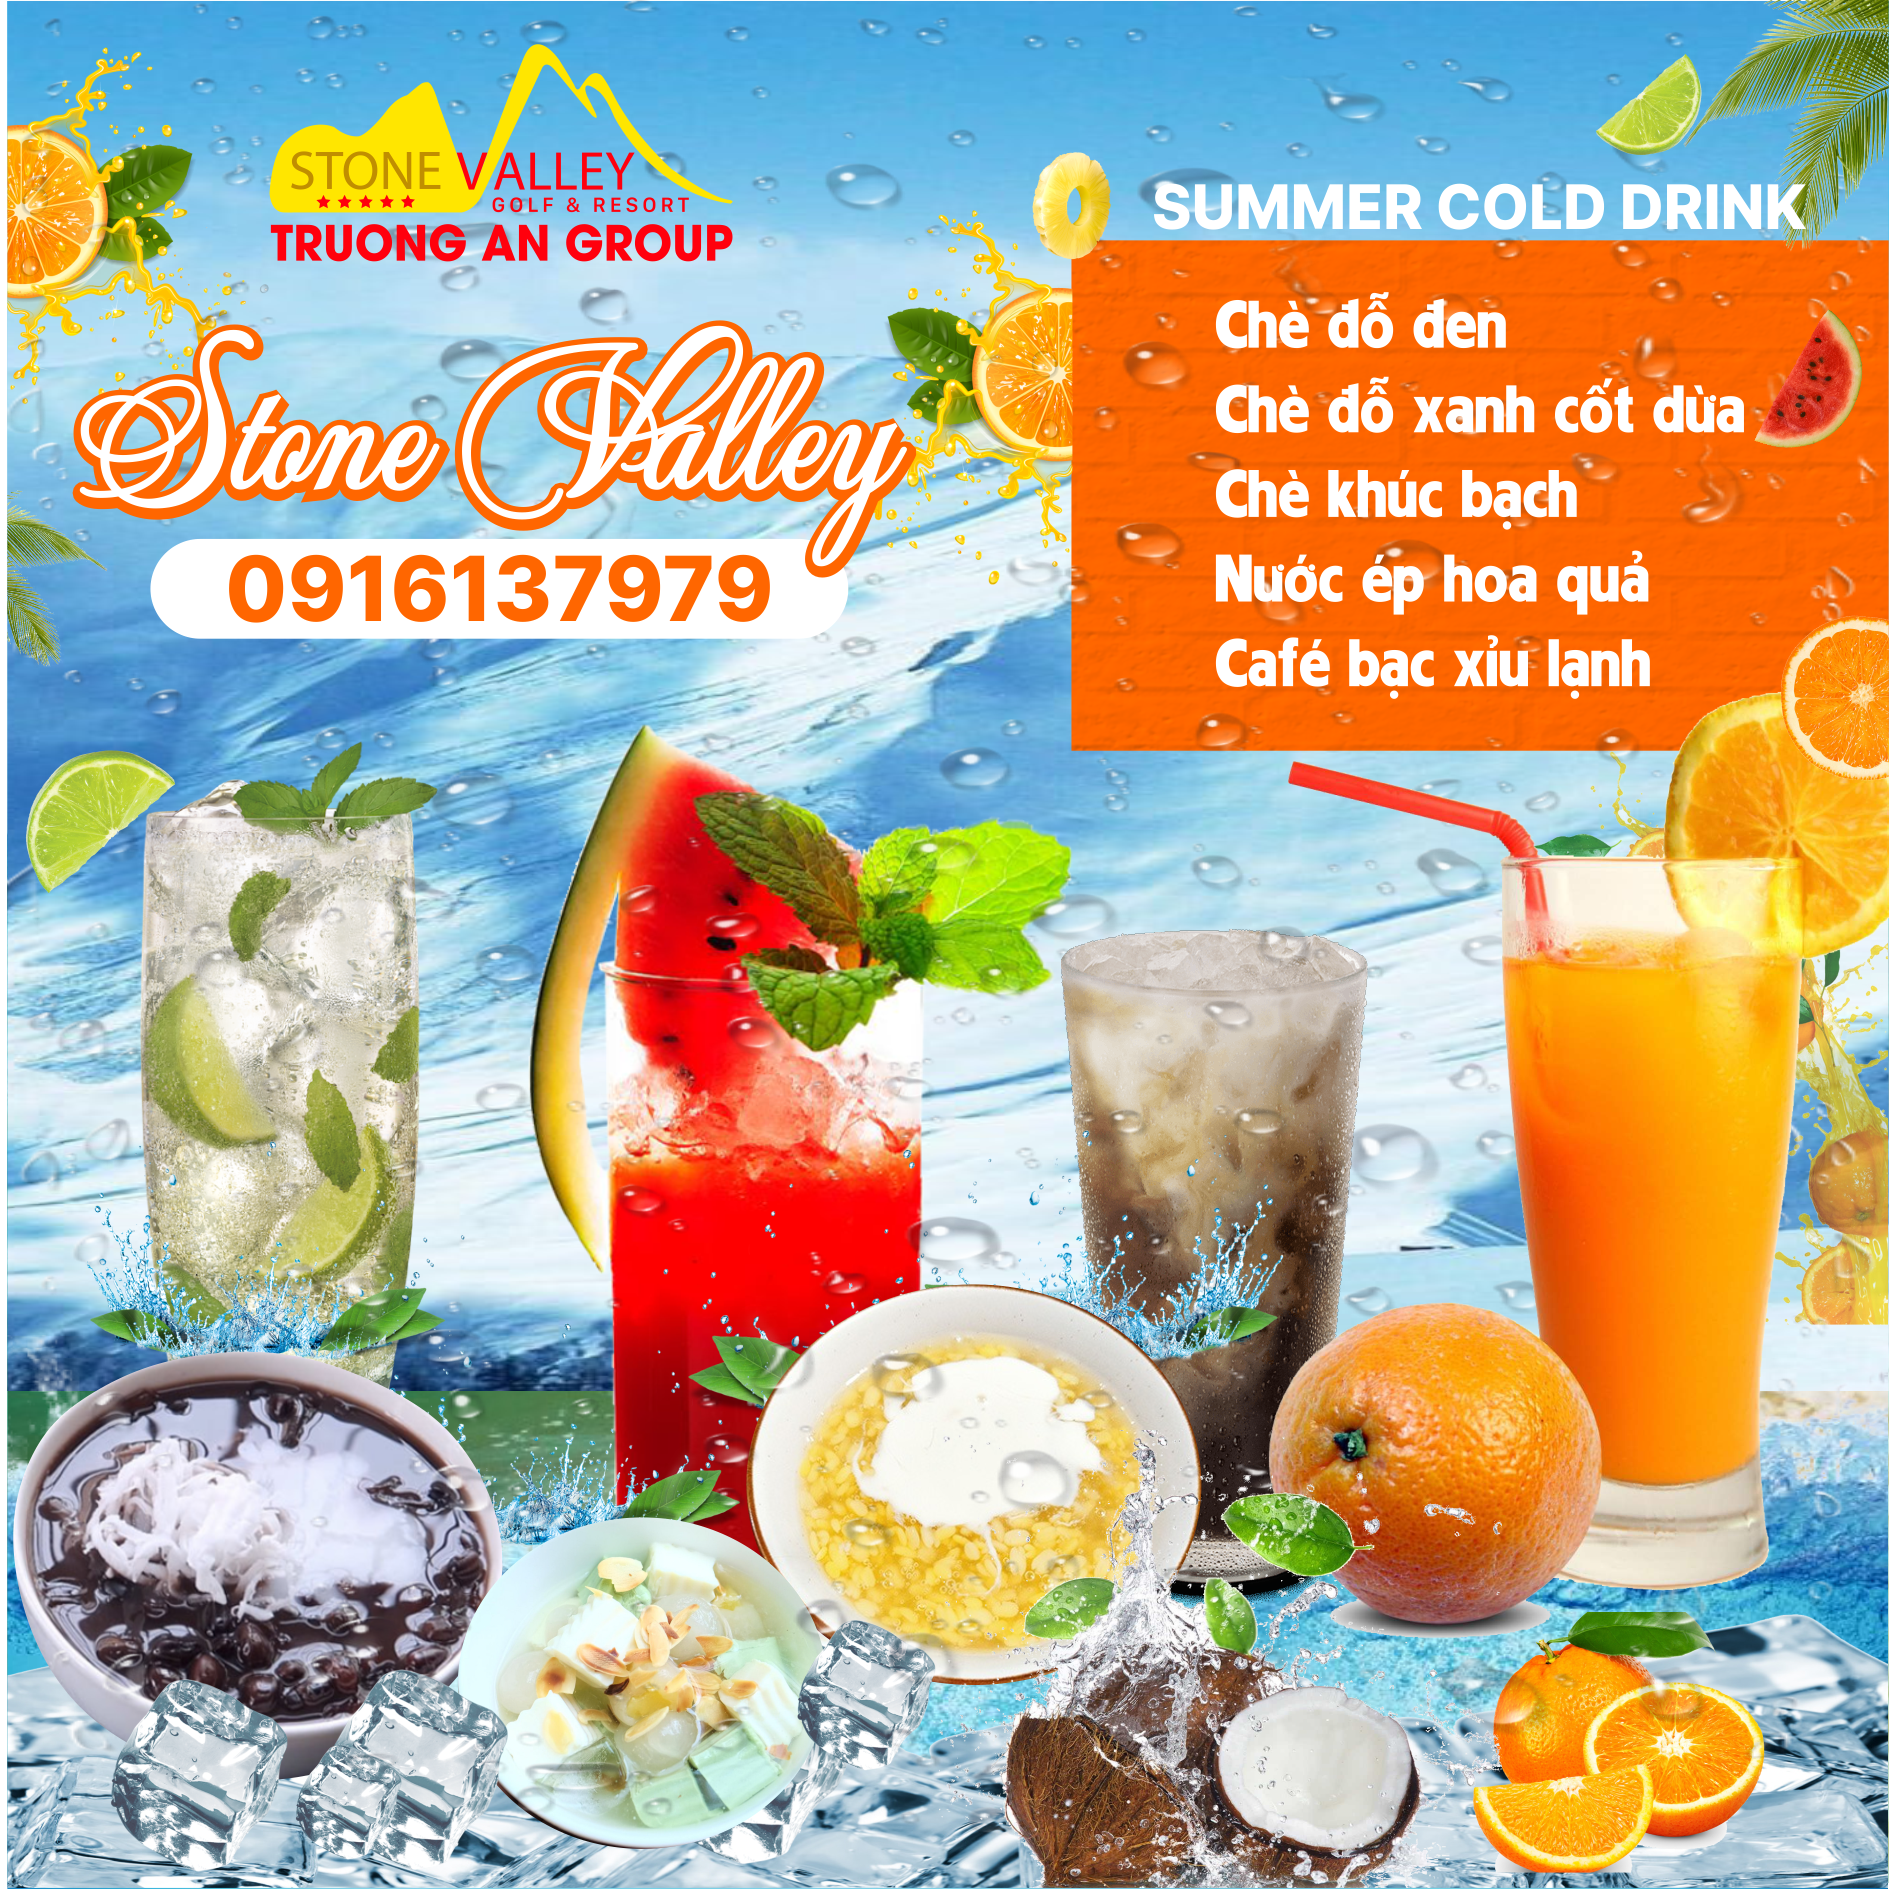 Cold Fruit Drink - Stone Valely Golf 